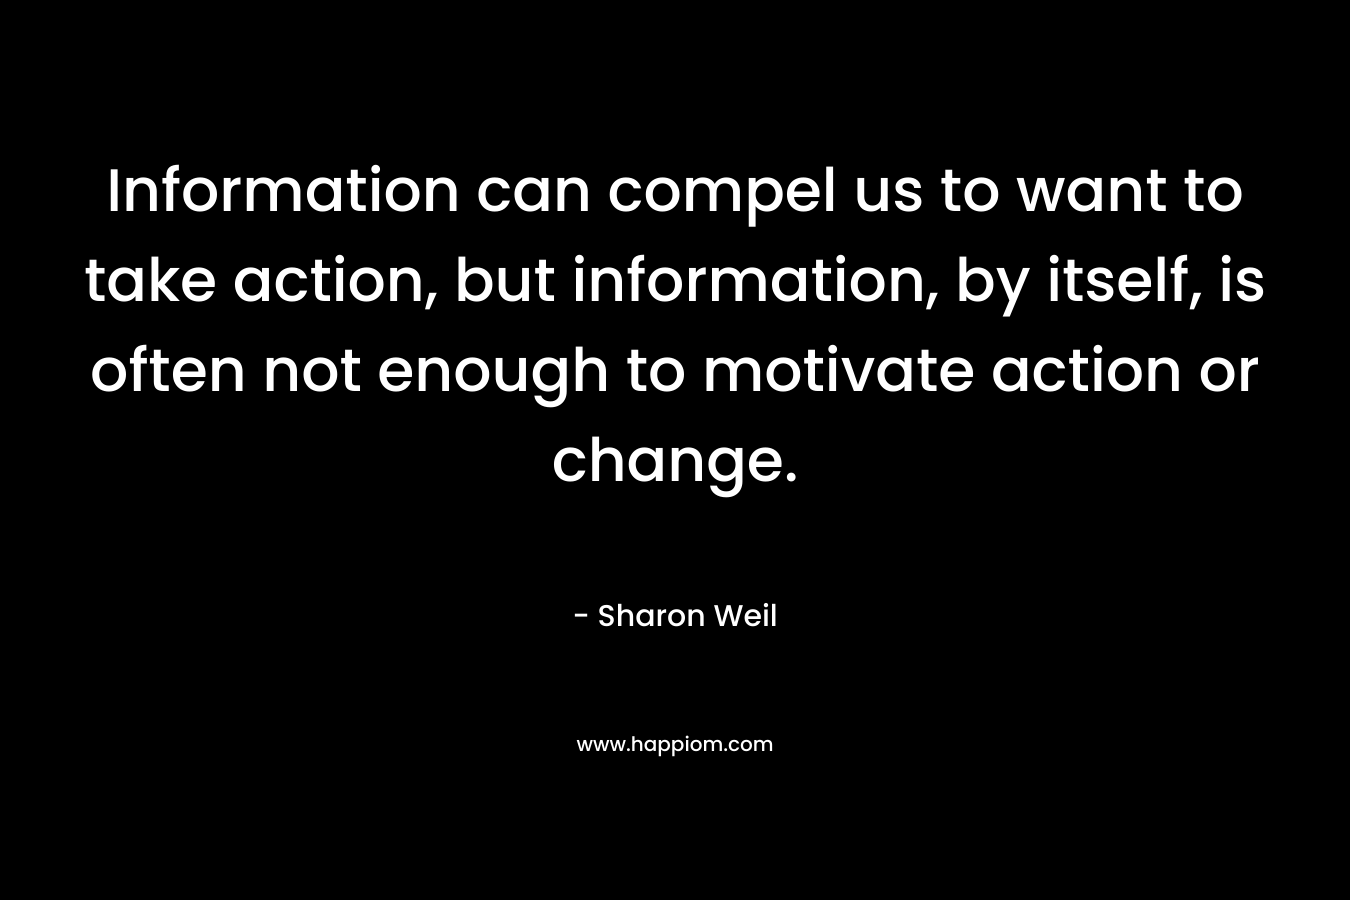 Information can compel us to want to take action, but information, by itself, is often not enough to motivate action or change.